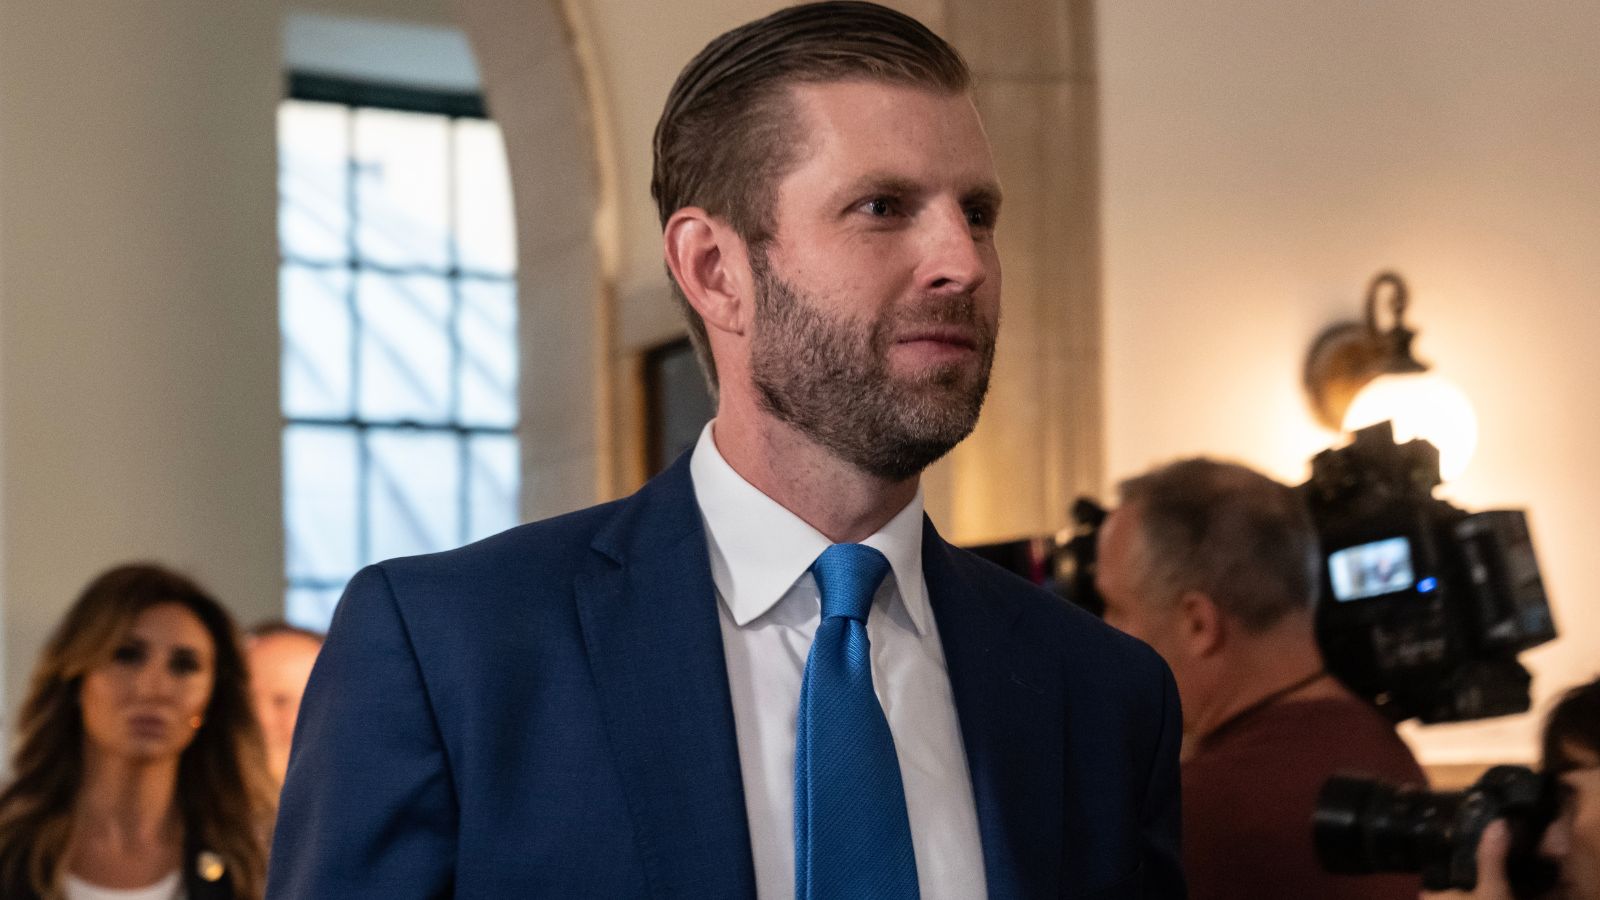 “World-Class Racist”: Eric Trump Faces Criticism After Attending Miami Event with Notorious Antisemitic Neo-Nazi